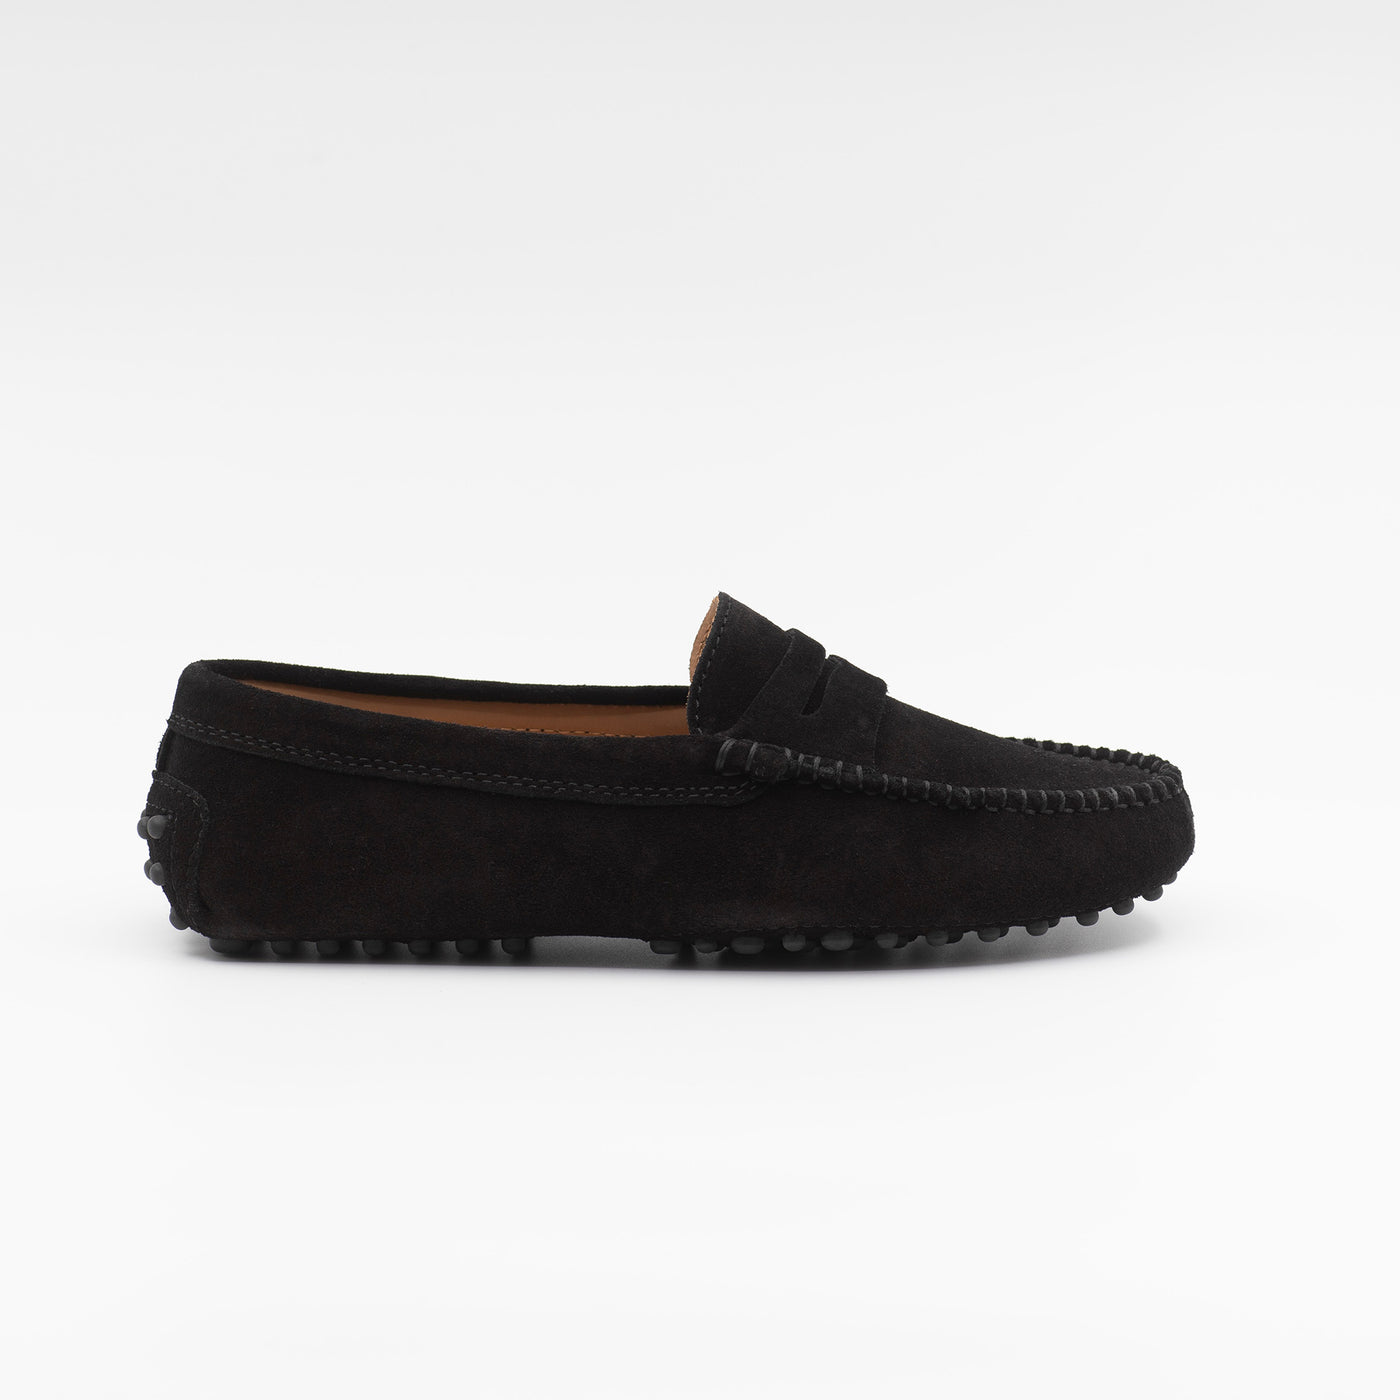 Gommino loafer in black suede